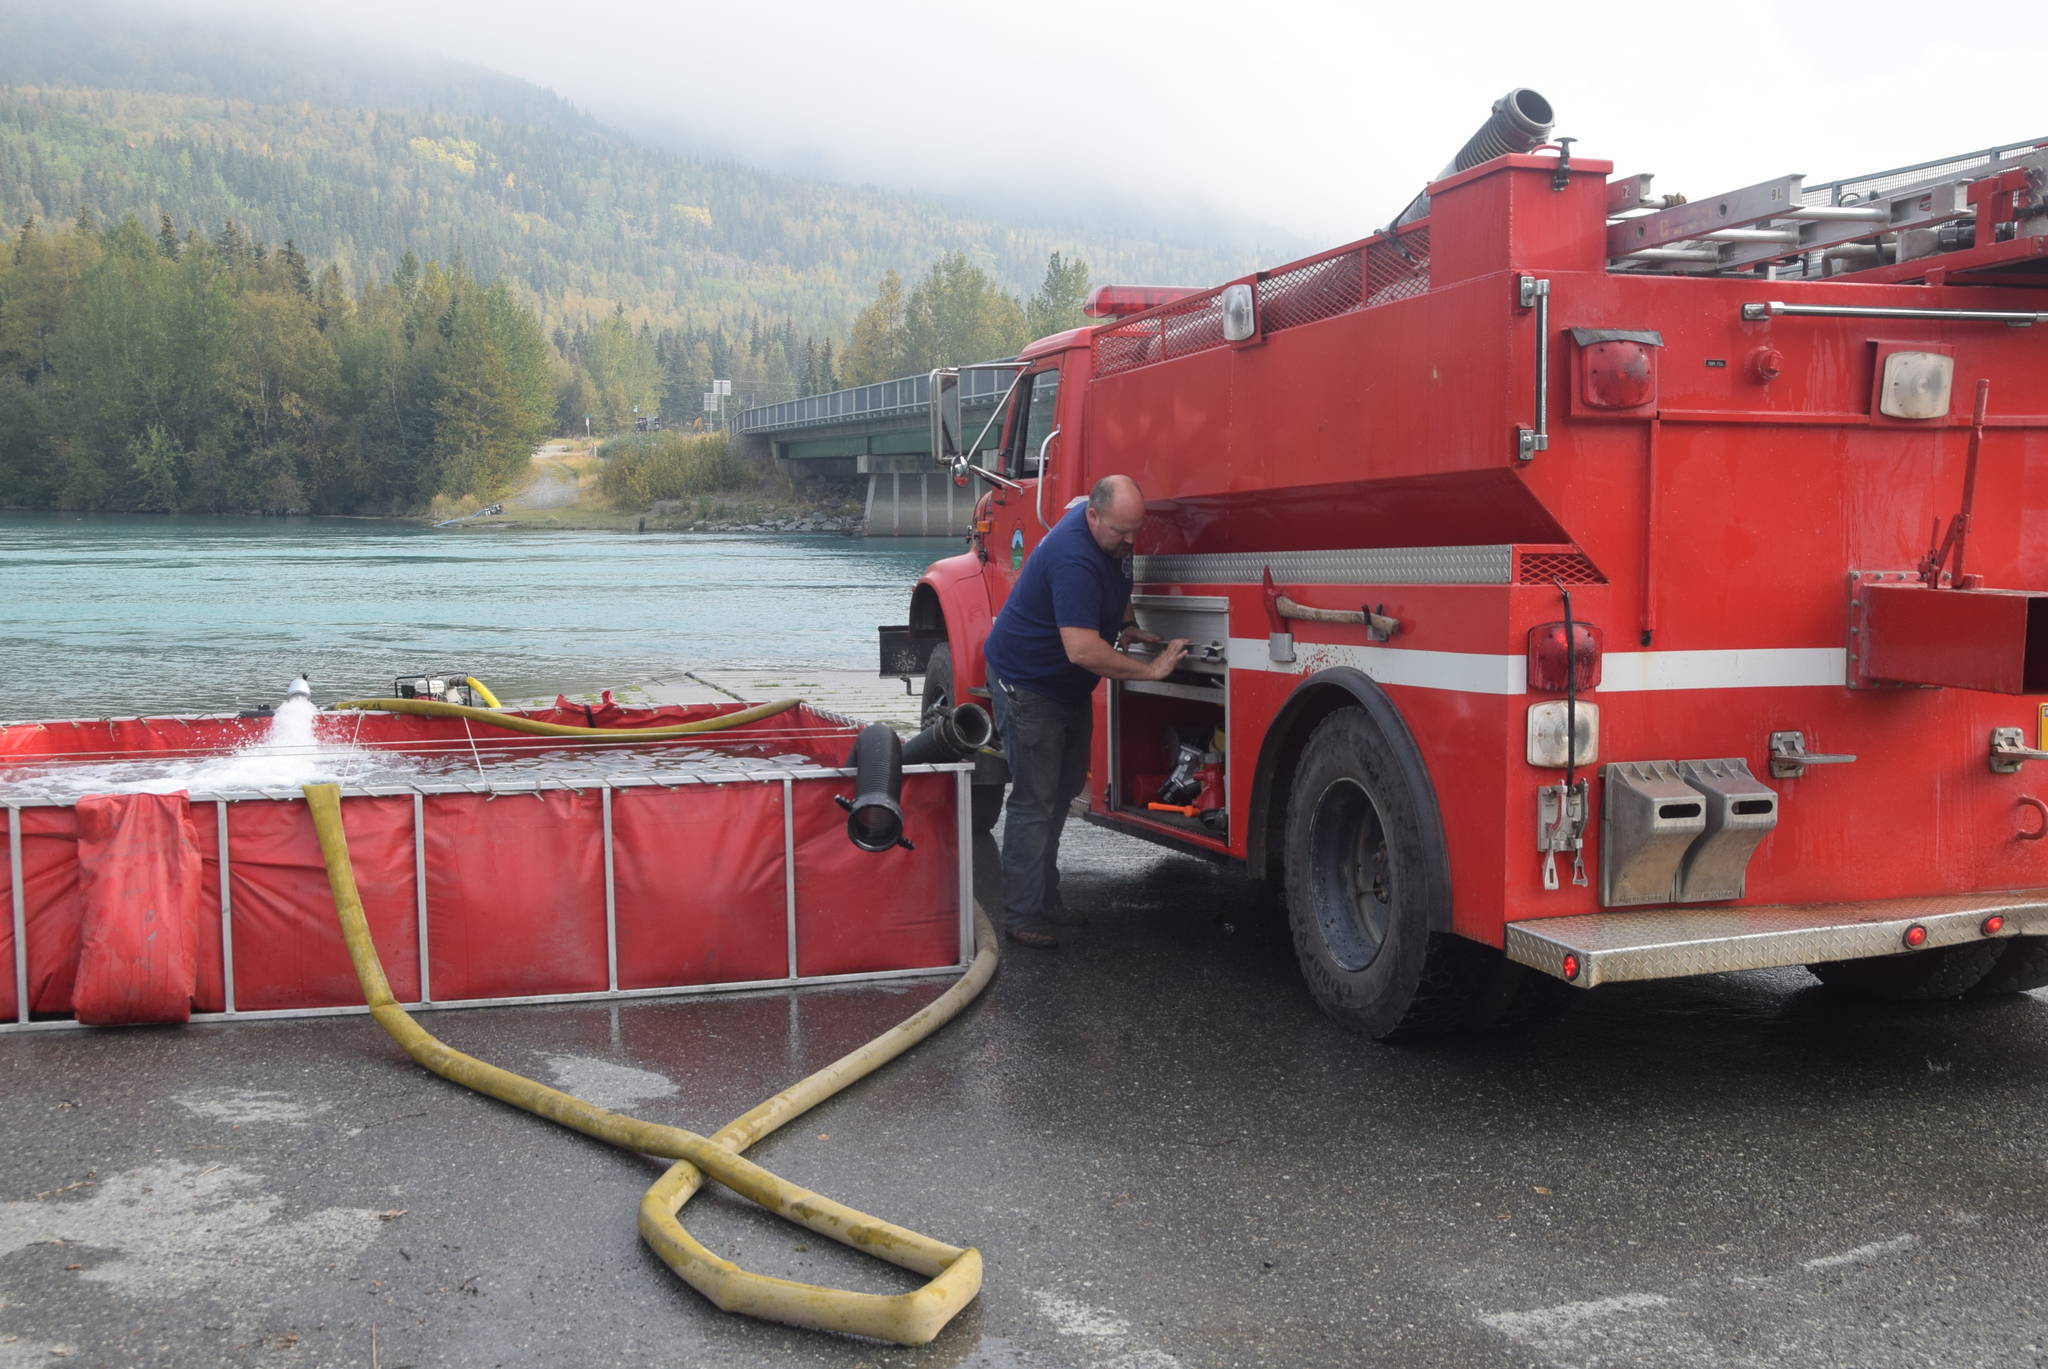 A firefighter from Cooper Landing Emergency Services refills a water tanker at the banks of the Kenai River in Cooper Landing, Alaska on Aug. 30, 2019. (Photo by Brian Mazurek/Peninsula Clarion)